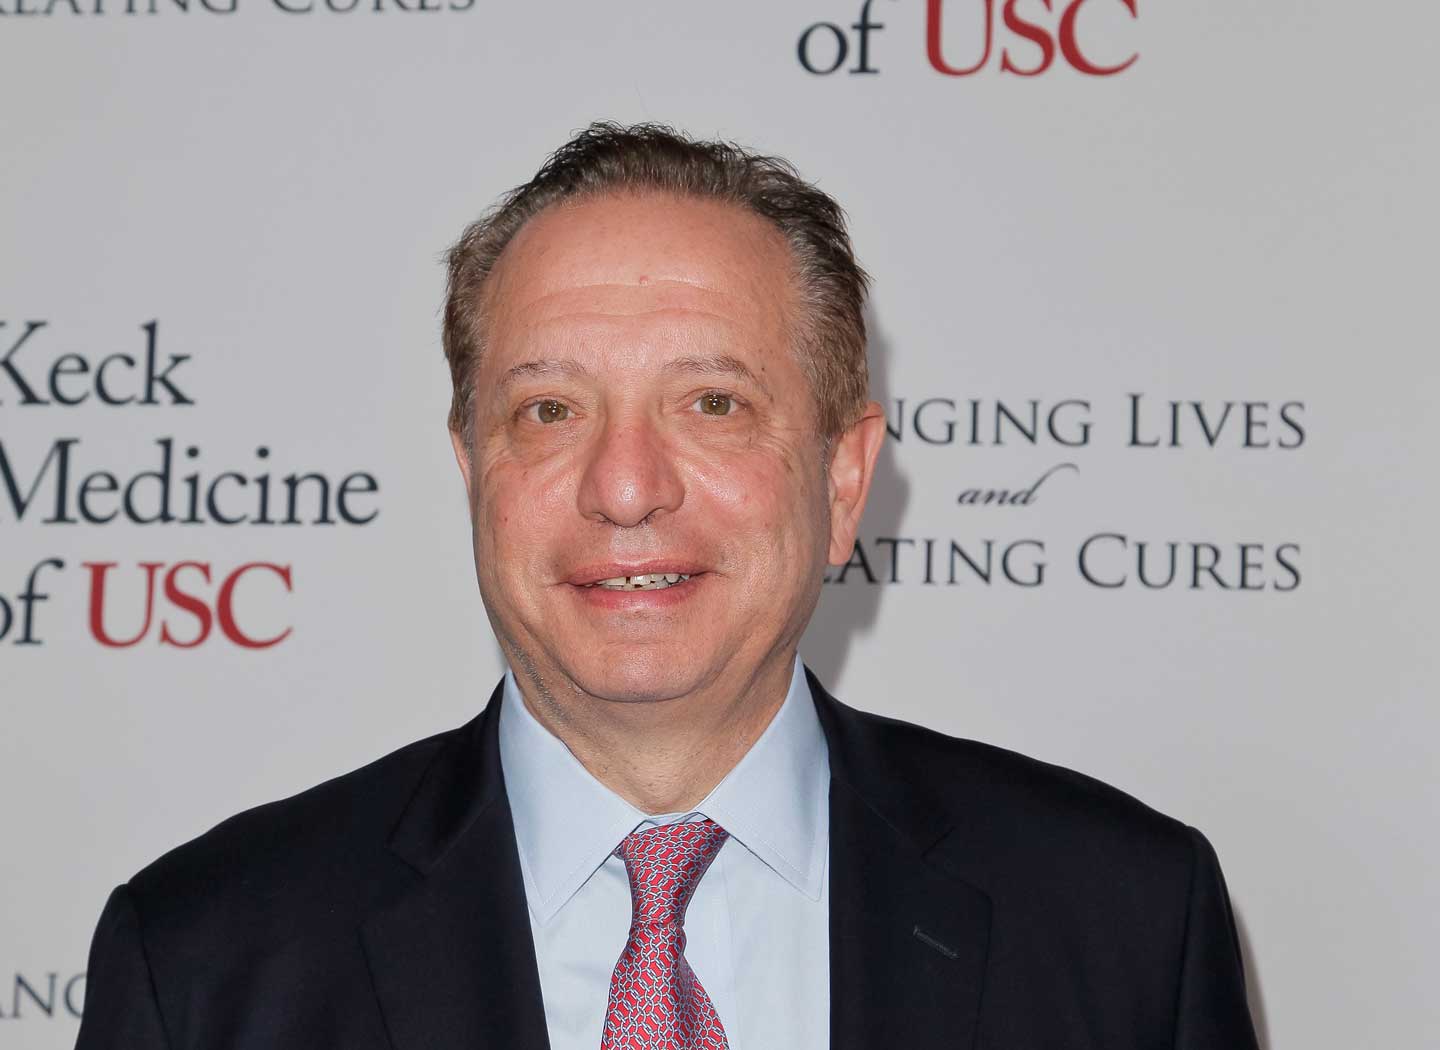 Former Dean of the Keck School of Medicine at USC , Carmen A. Puliafito attends the USC Institute of Urology 'Changing Lives And Creating Cures' Gala at the Beverly Wilshire Four Seasons Hotel on November 20, 2014 in Beverly Hills, California.  (Tibrina Hobson/FilmMagic)